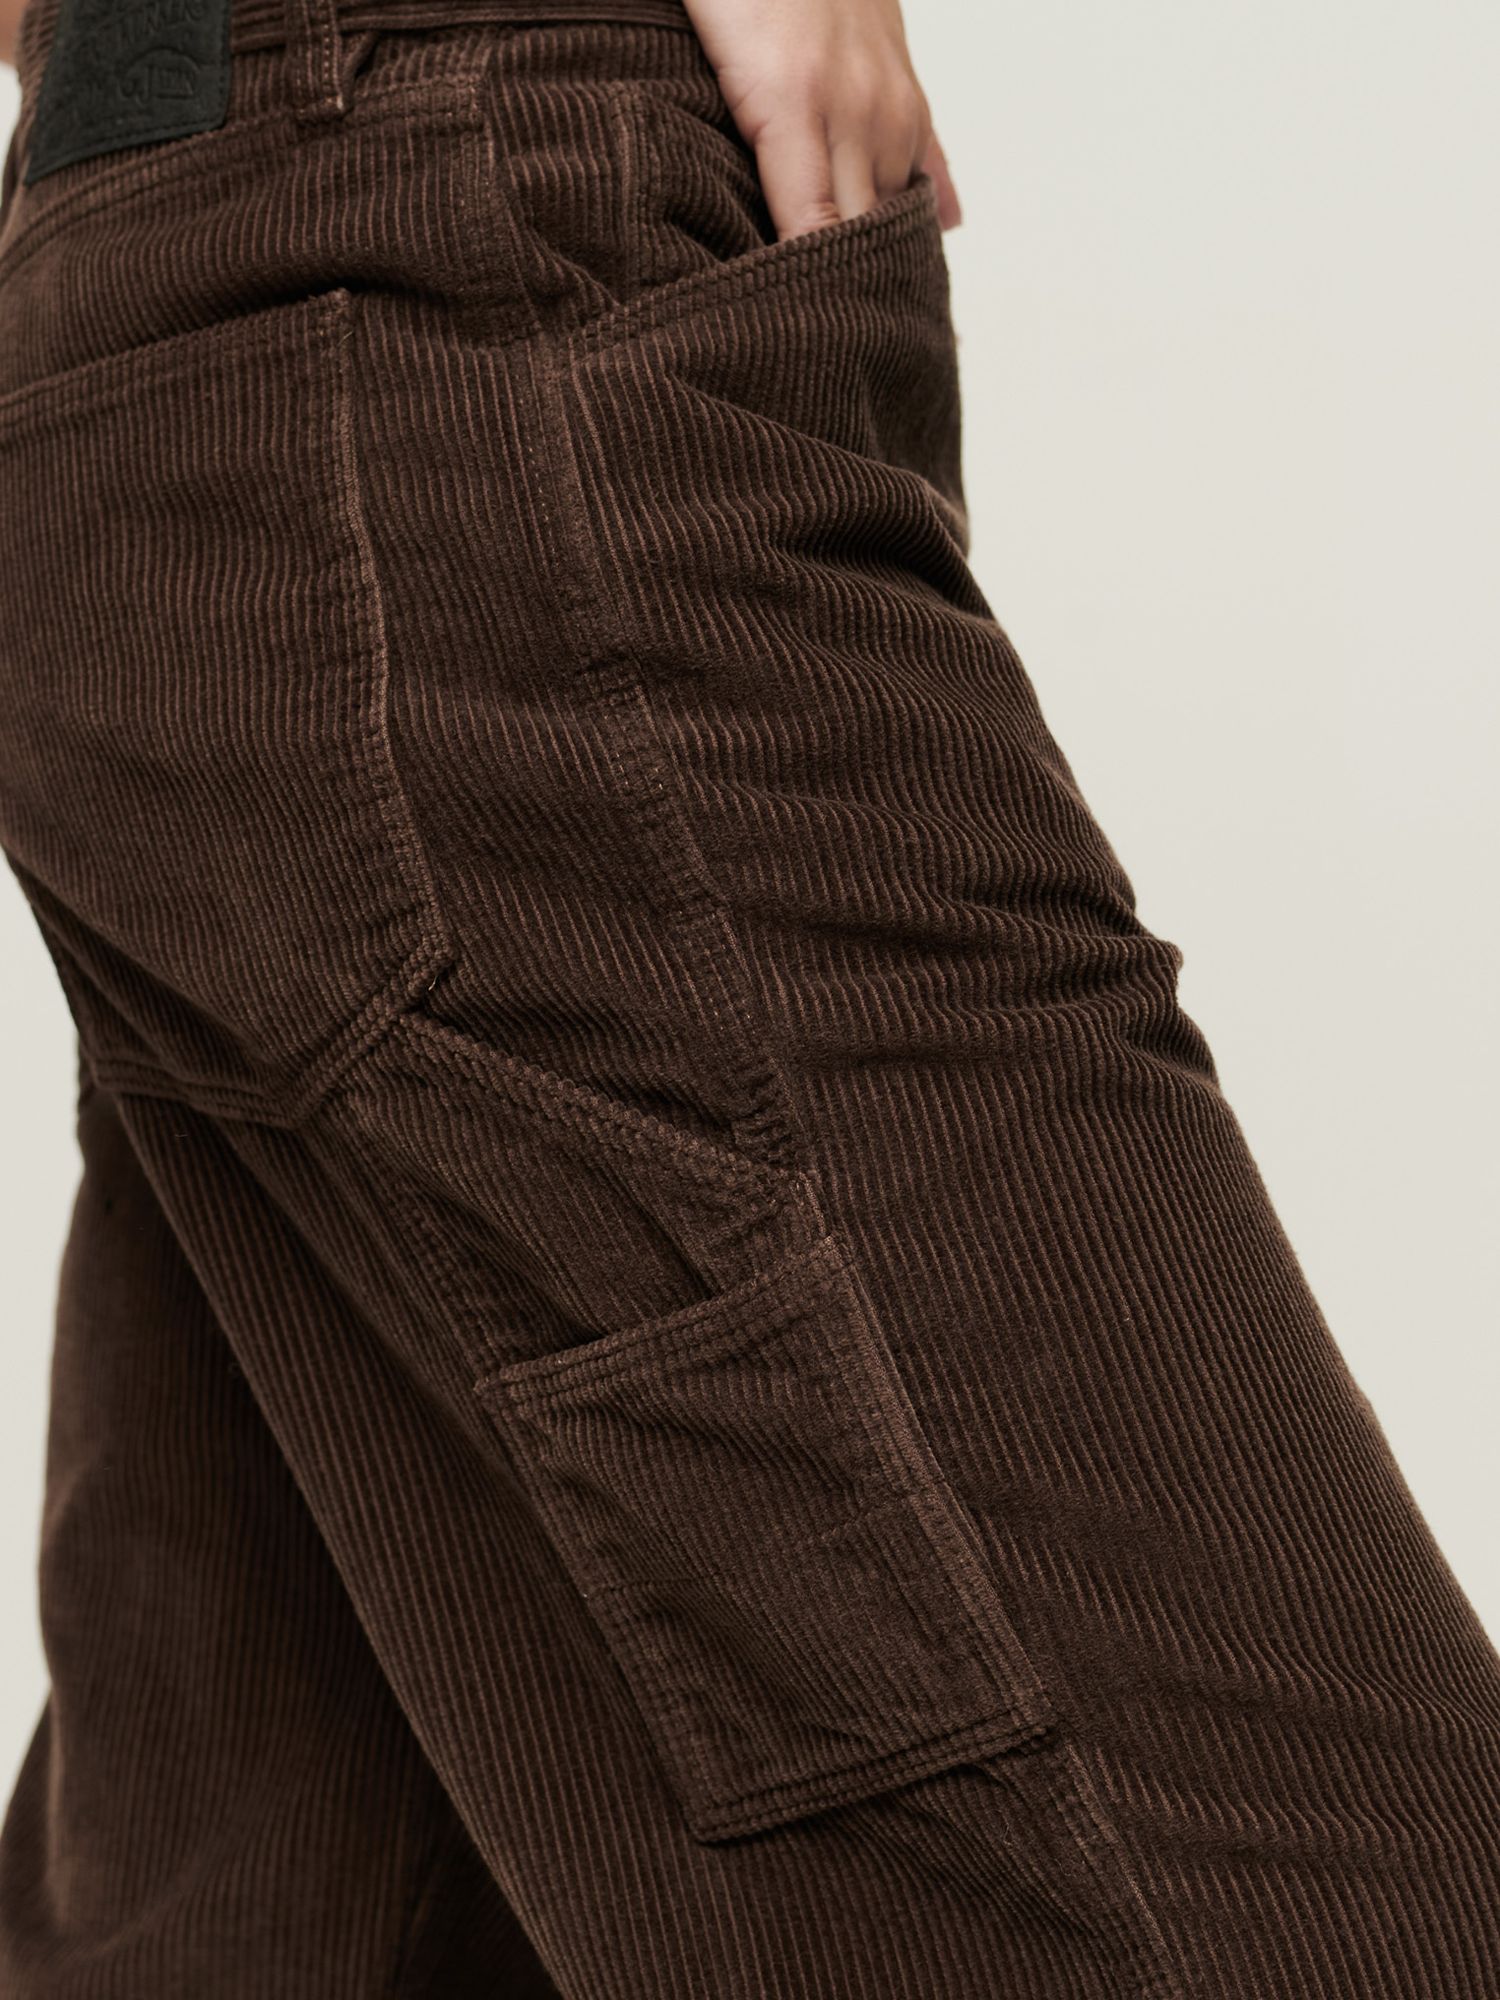 Superdry Cord Carpenter Trousers, Chocolate Brown at John Lewis & Partners